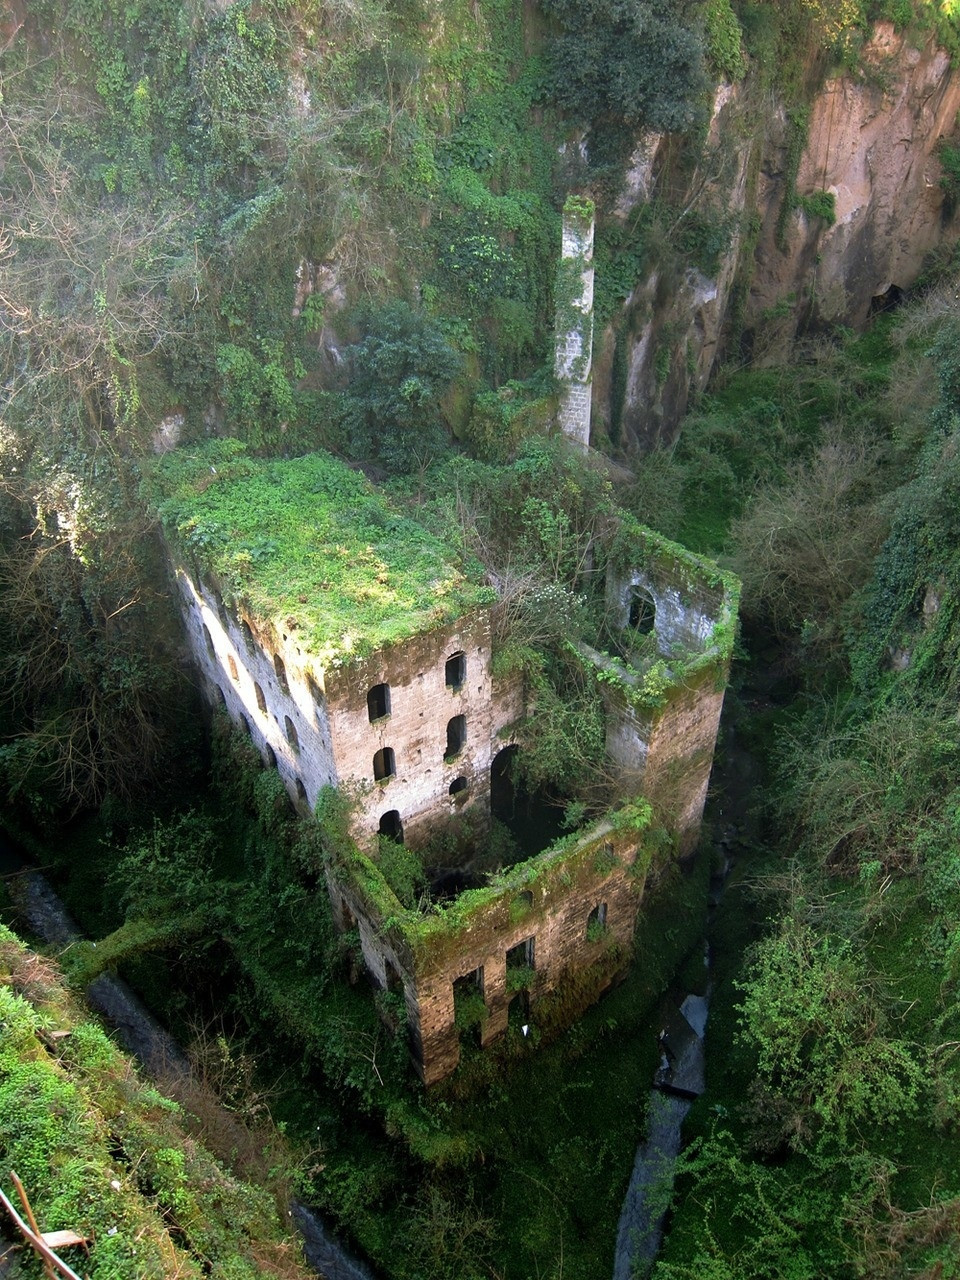 abandoned mill from 1866 in sorrento italy